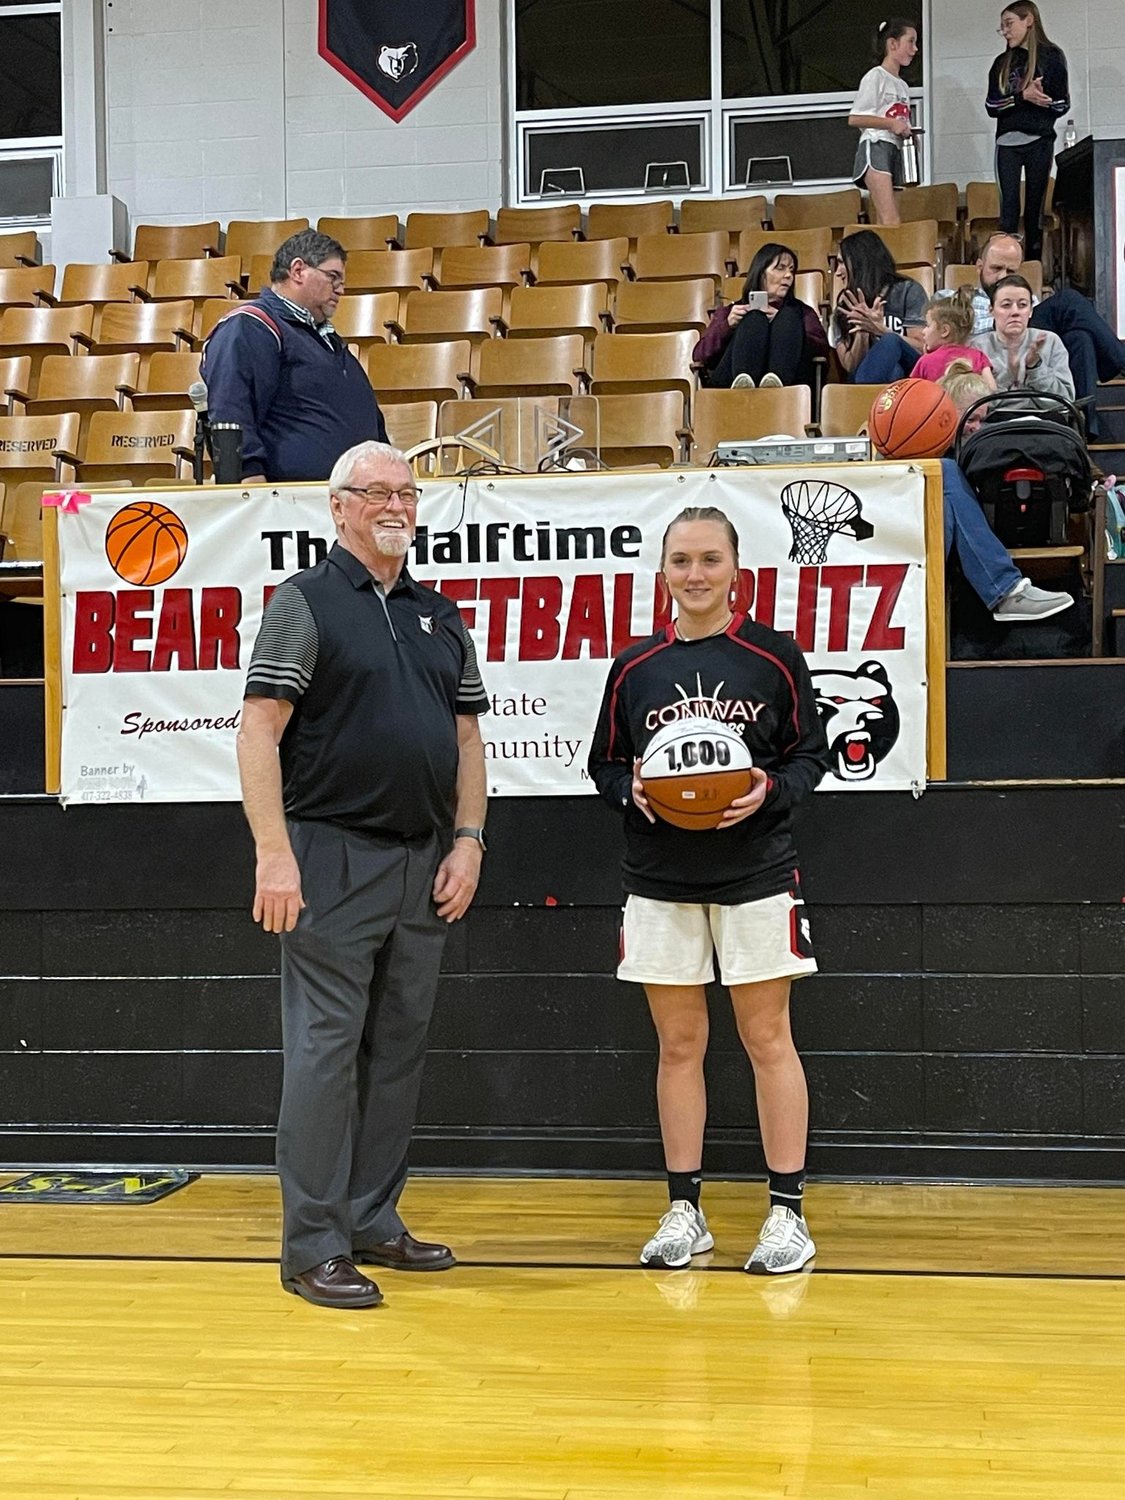 Head Coach Lynn Long presents Senior Graceson Cromer with a game ball to commemorate reaching 1,000 career points.